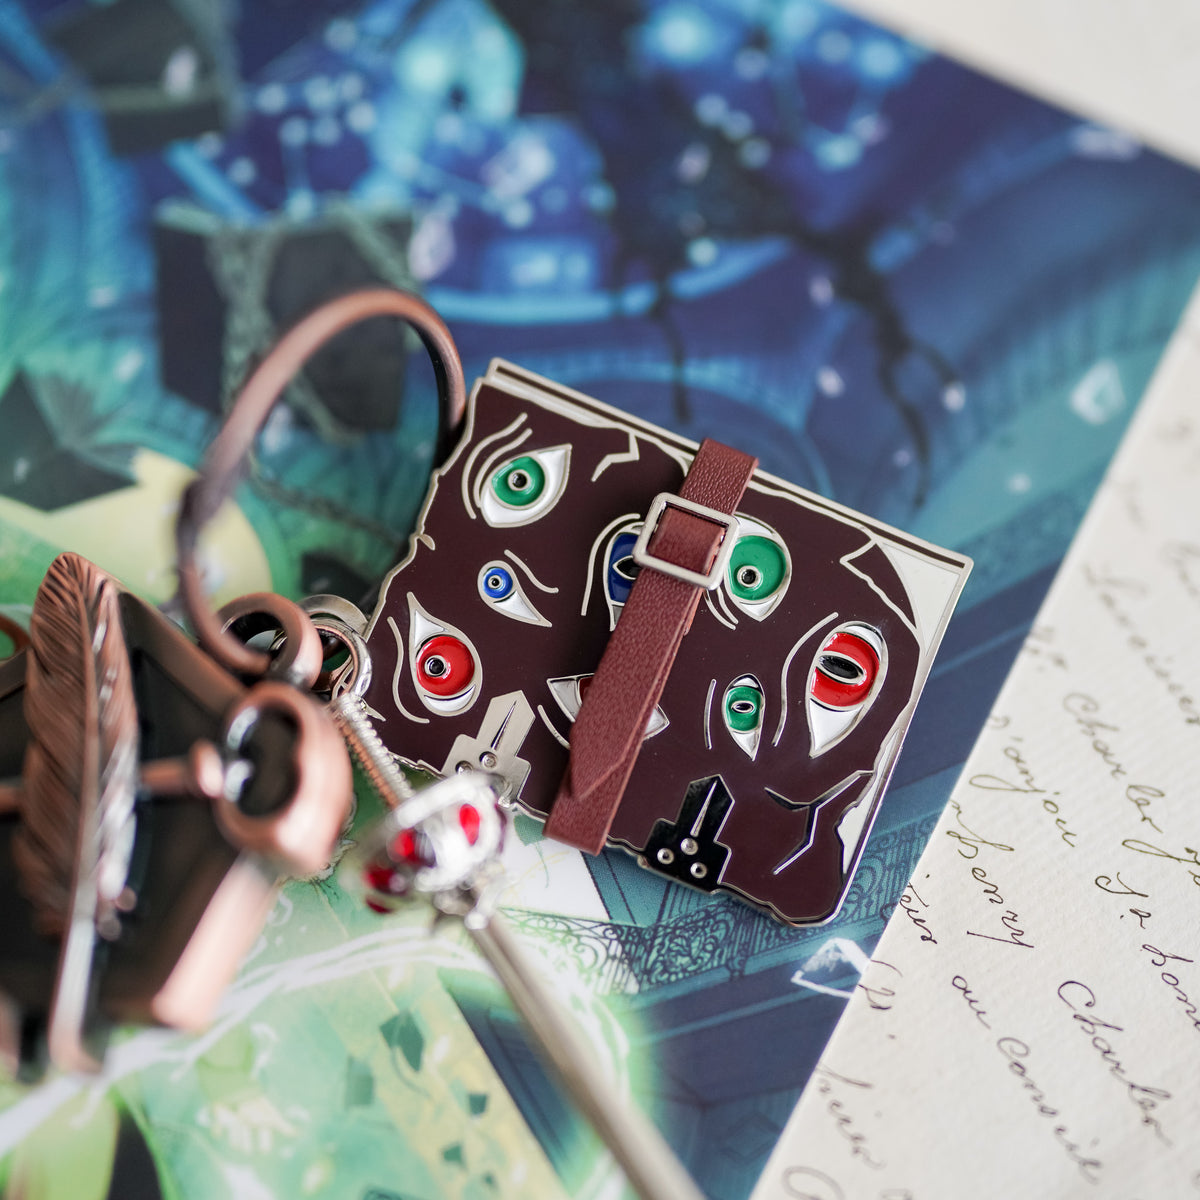 KEY - Sorcery of Thorns Key from LitJoy Crate | Collectibles &amp; Gifts for Booklovers